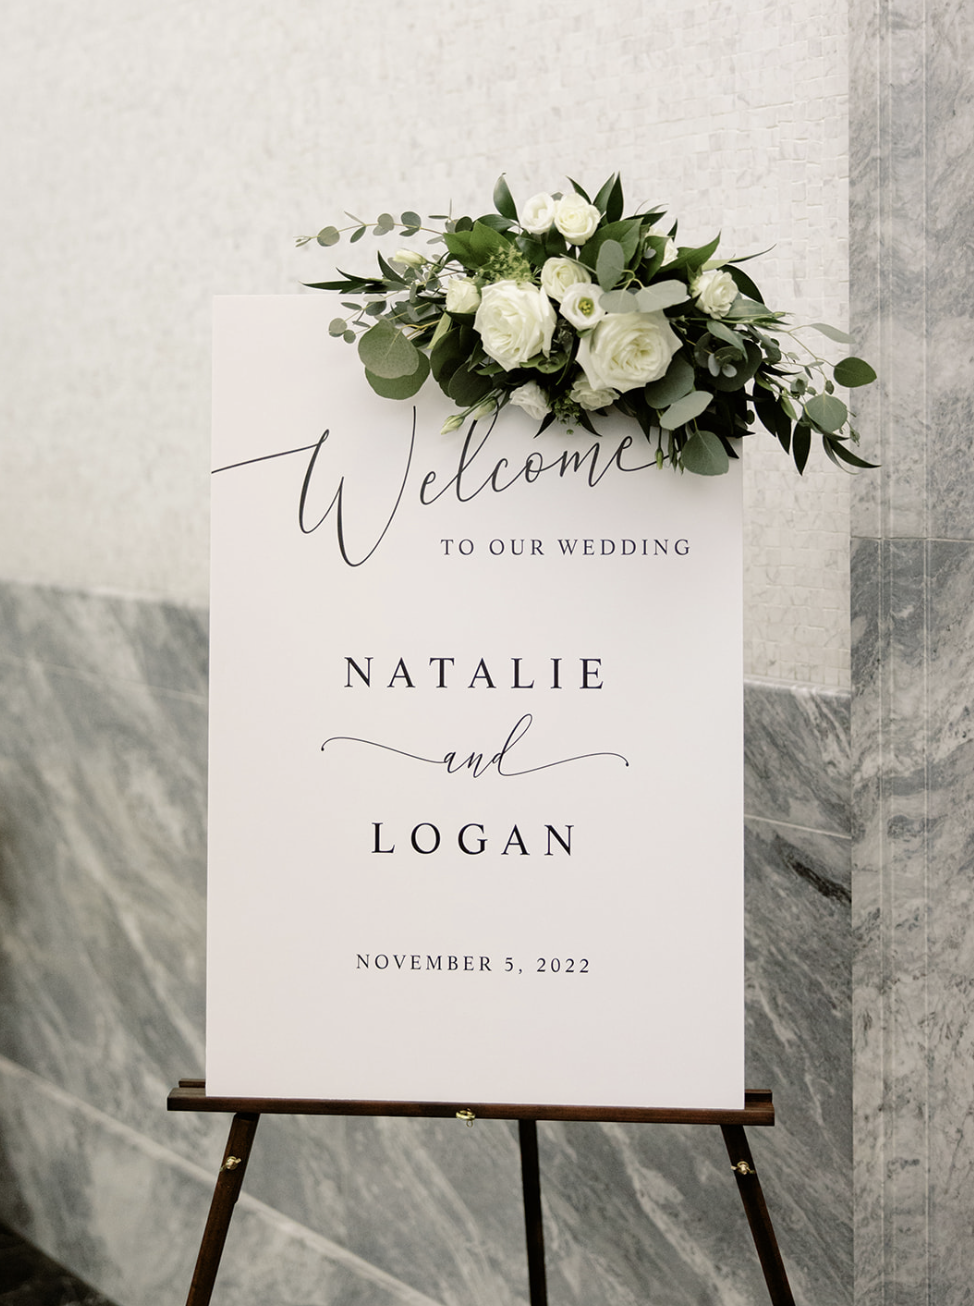 Elegant minimalist welcome sign decorated with greenery and white roses greets Chicago wedding ceremony guests.